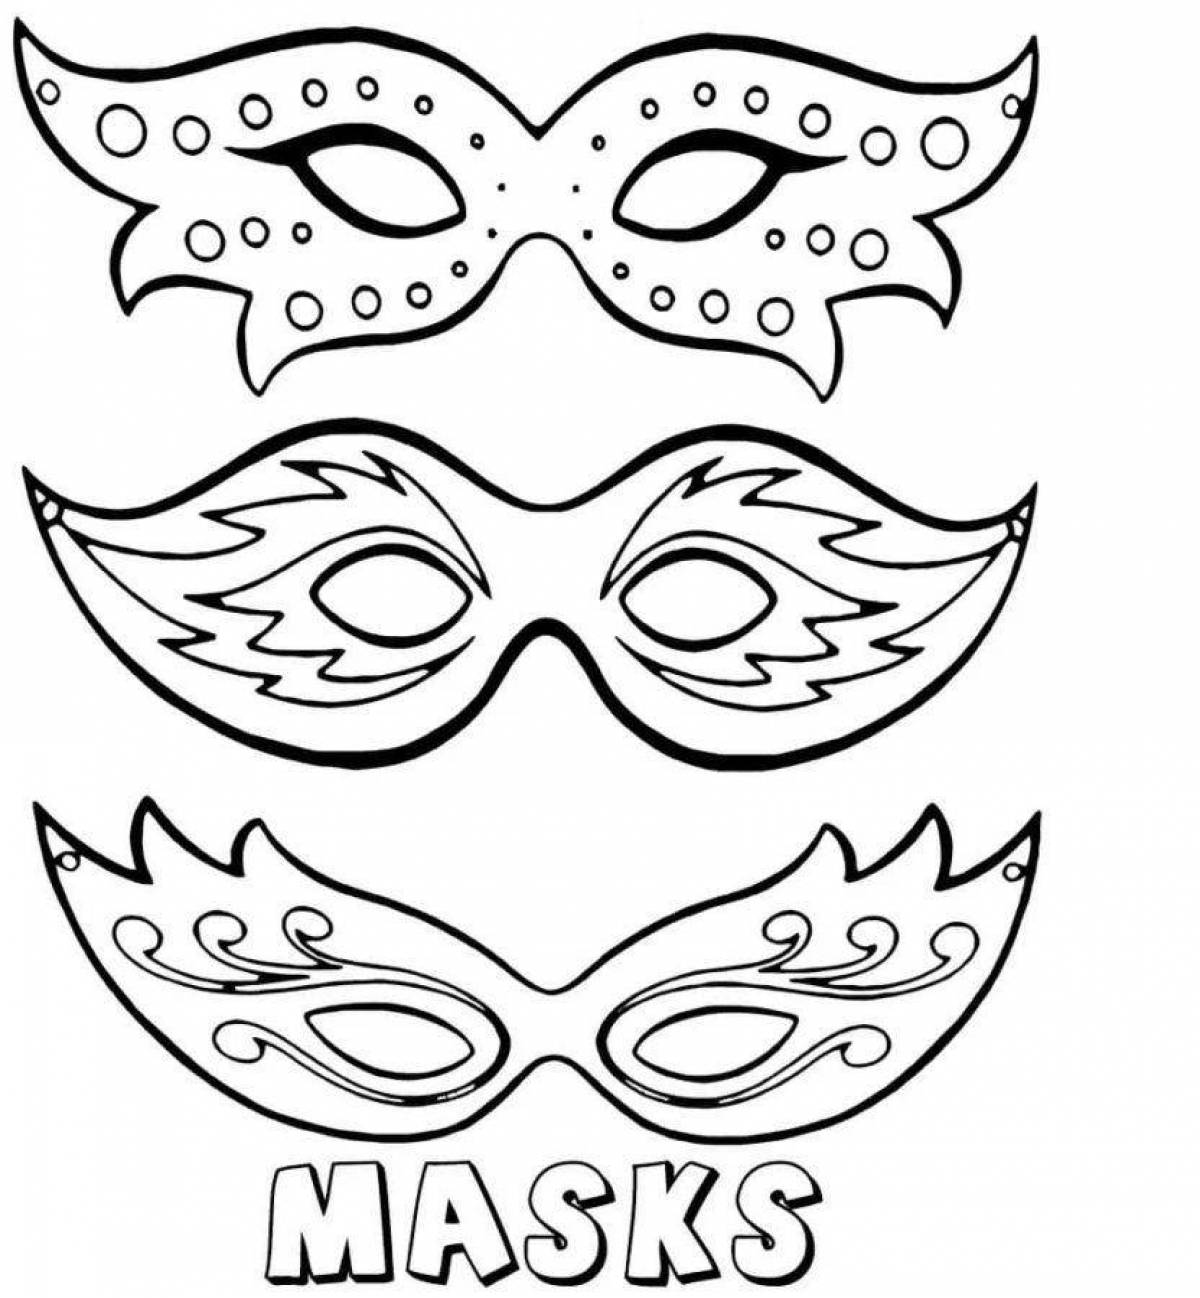 Colour-soaked theatrical masks for children